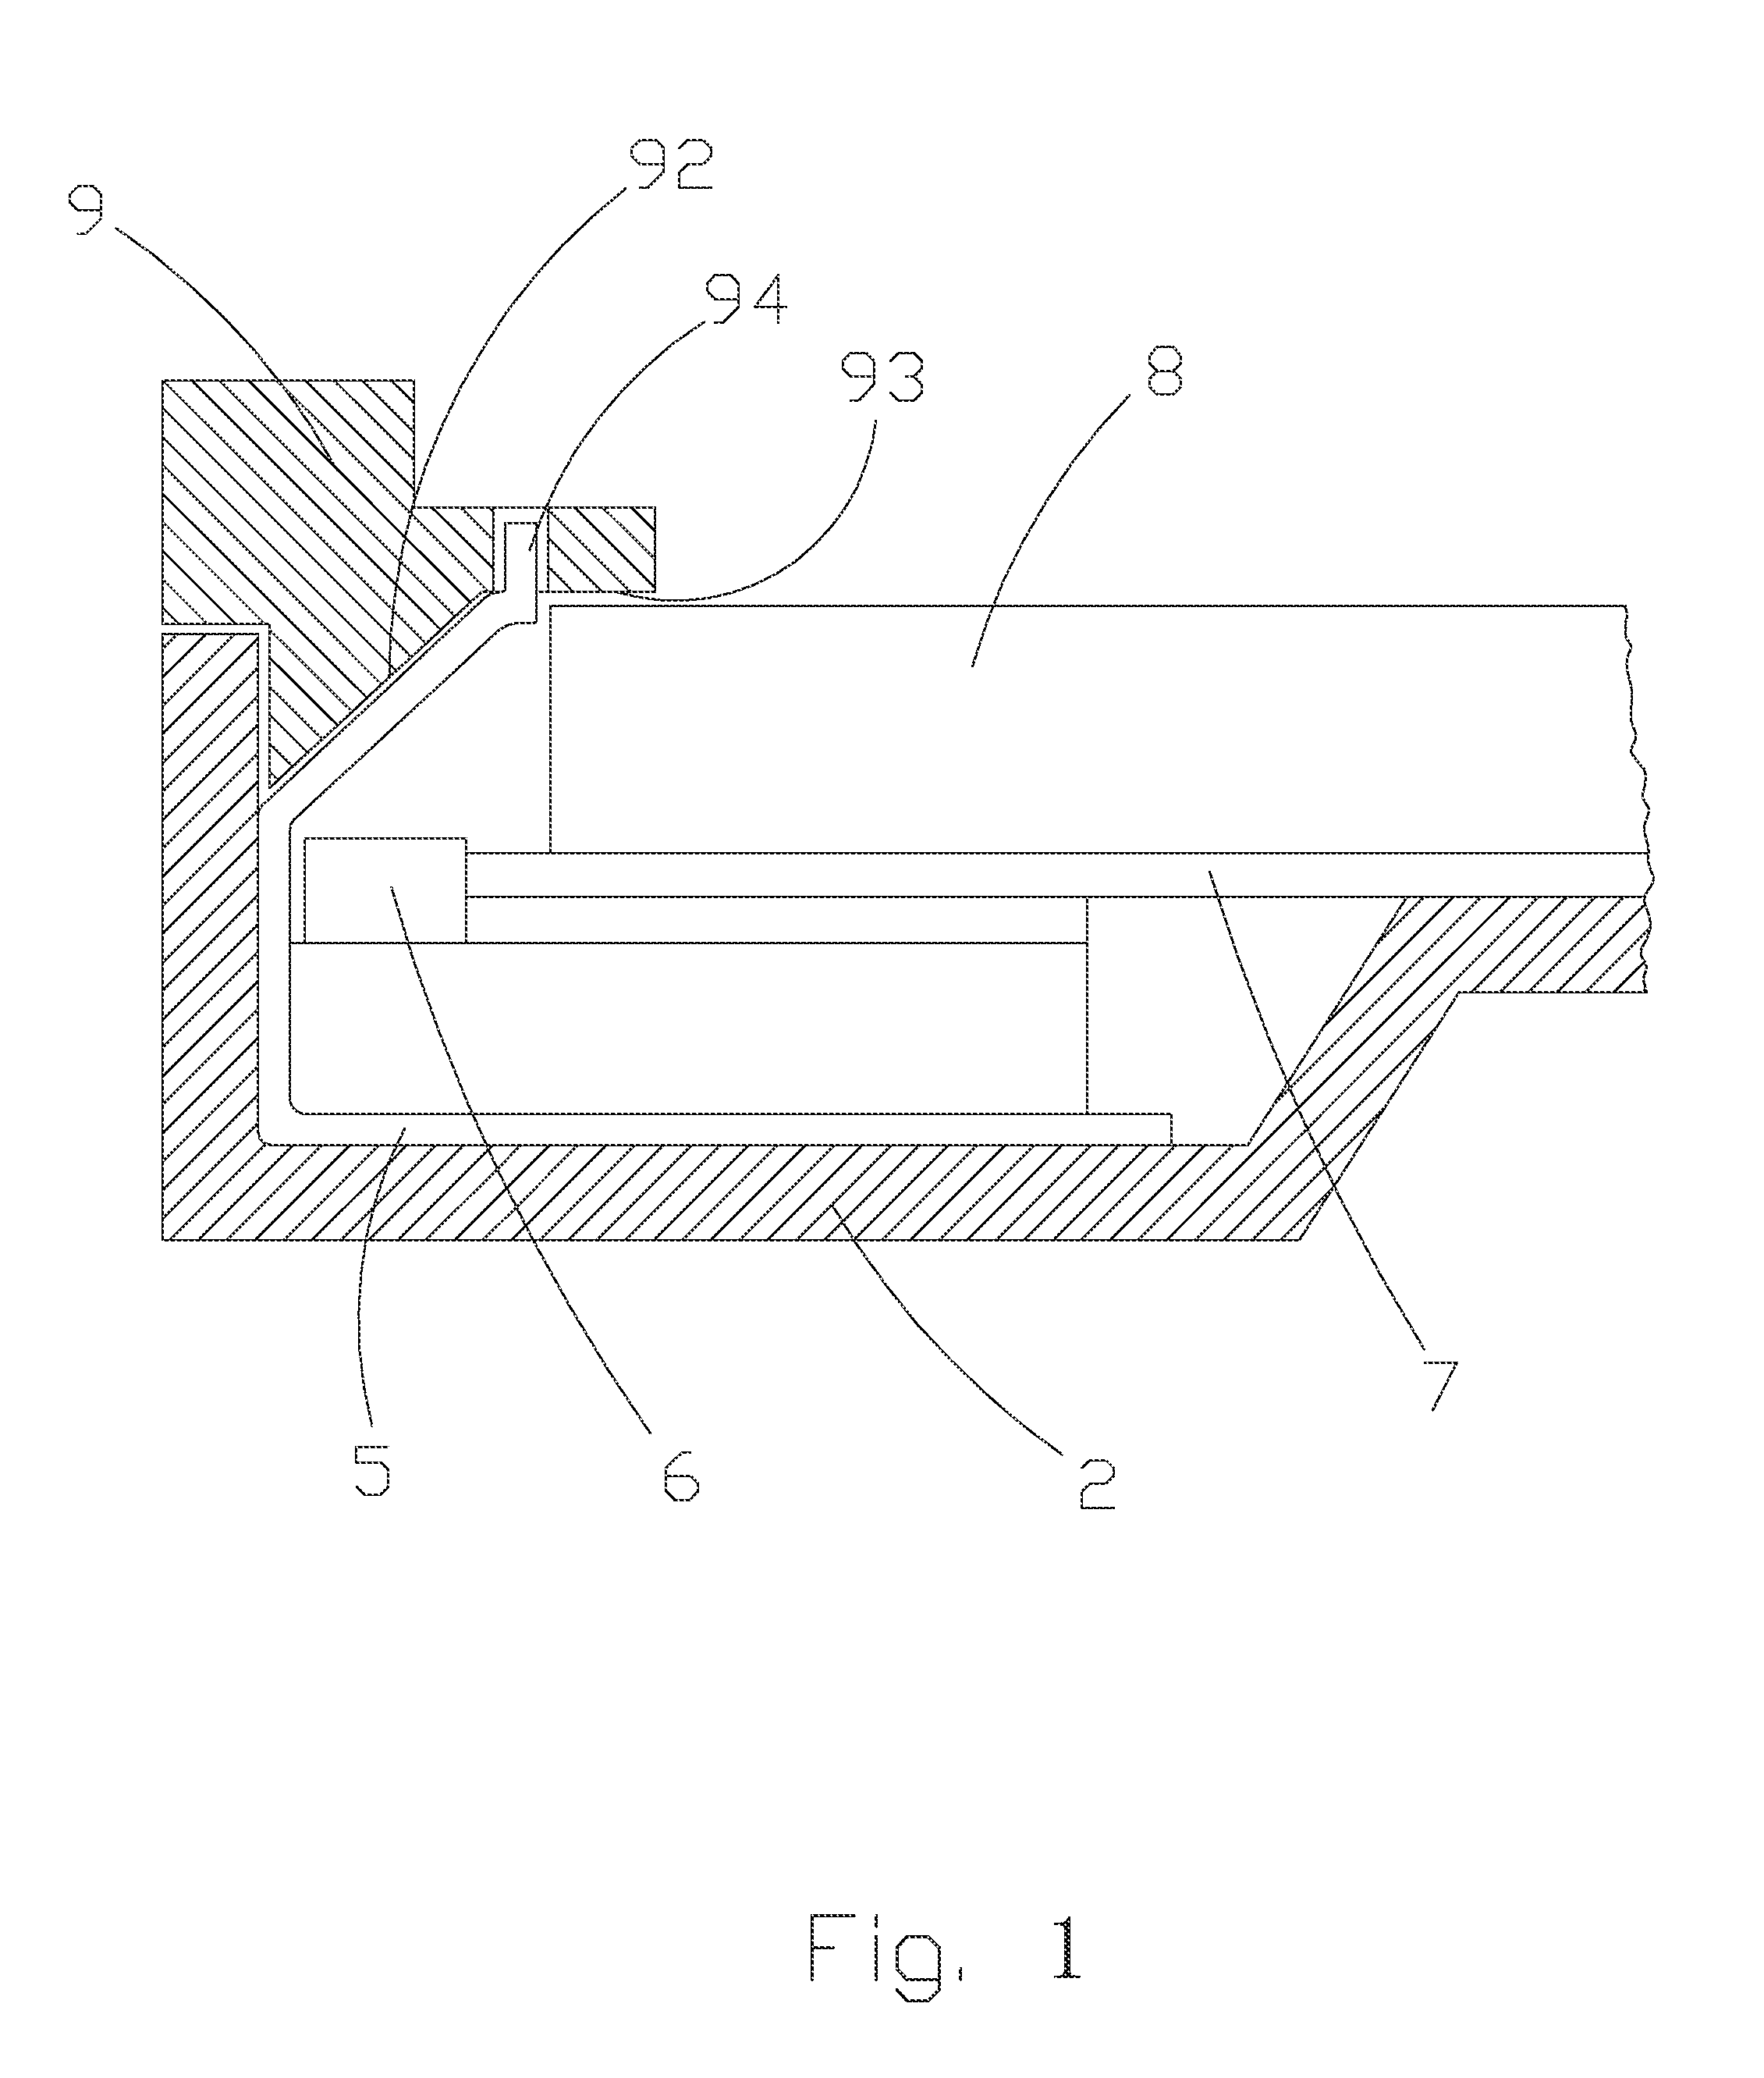 Backlight Module of Display Device